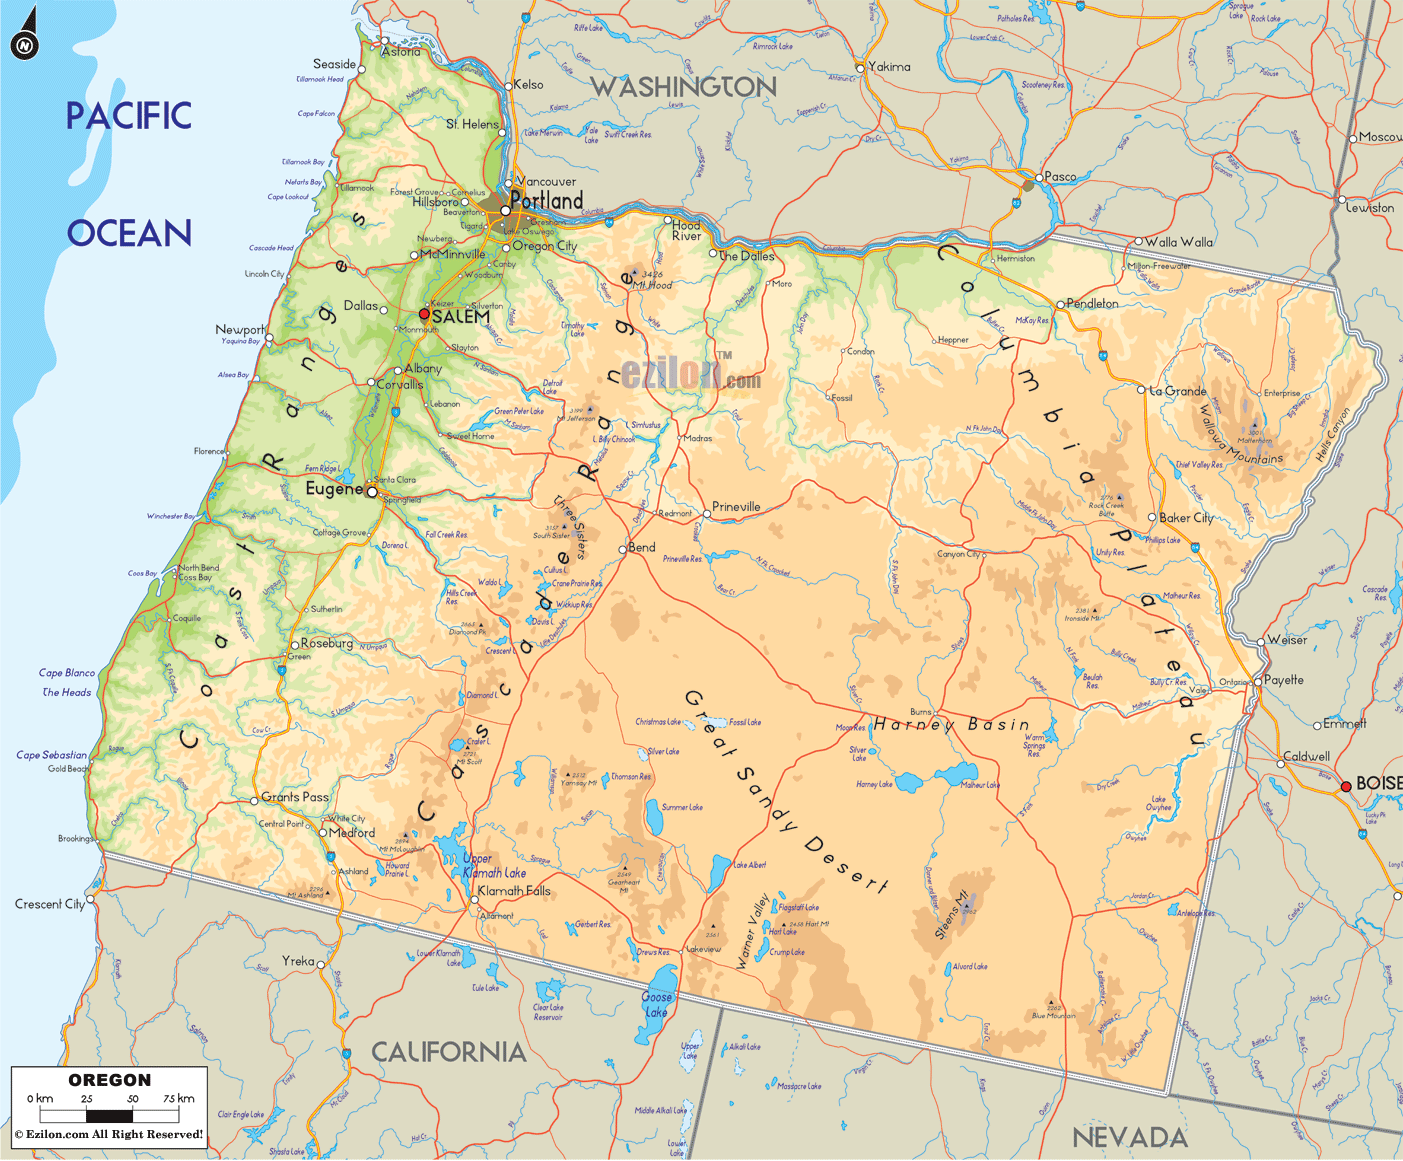 Physical map of Oregon State, USA showing major geographical features such as rivers, lakes, mountains, topography and land formations.